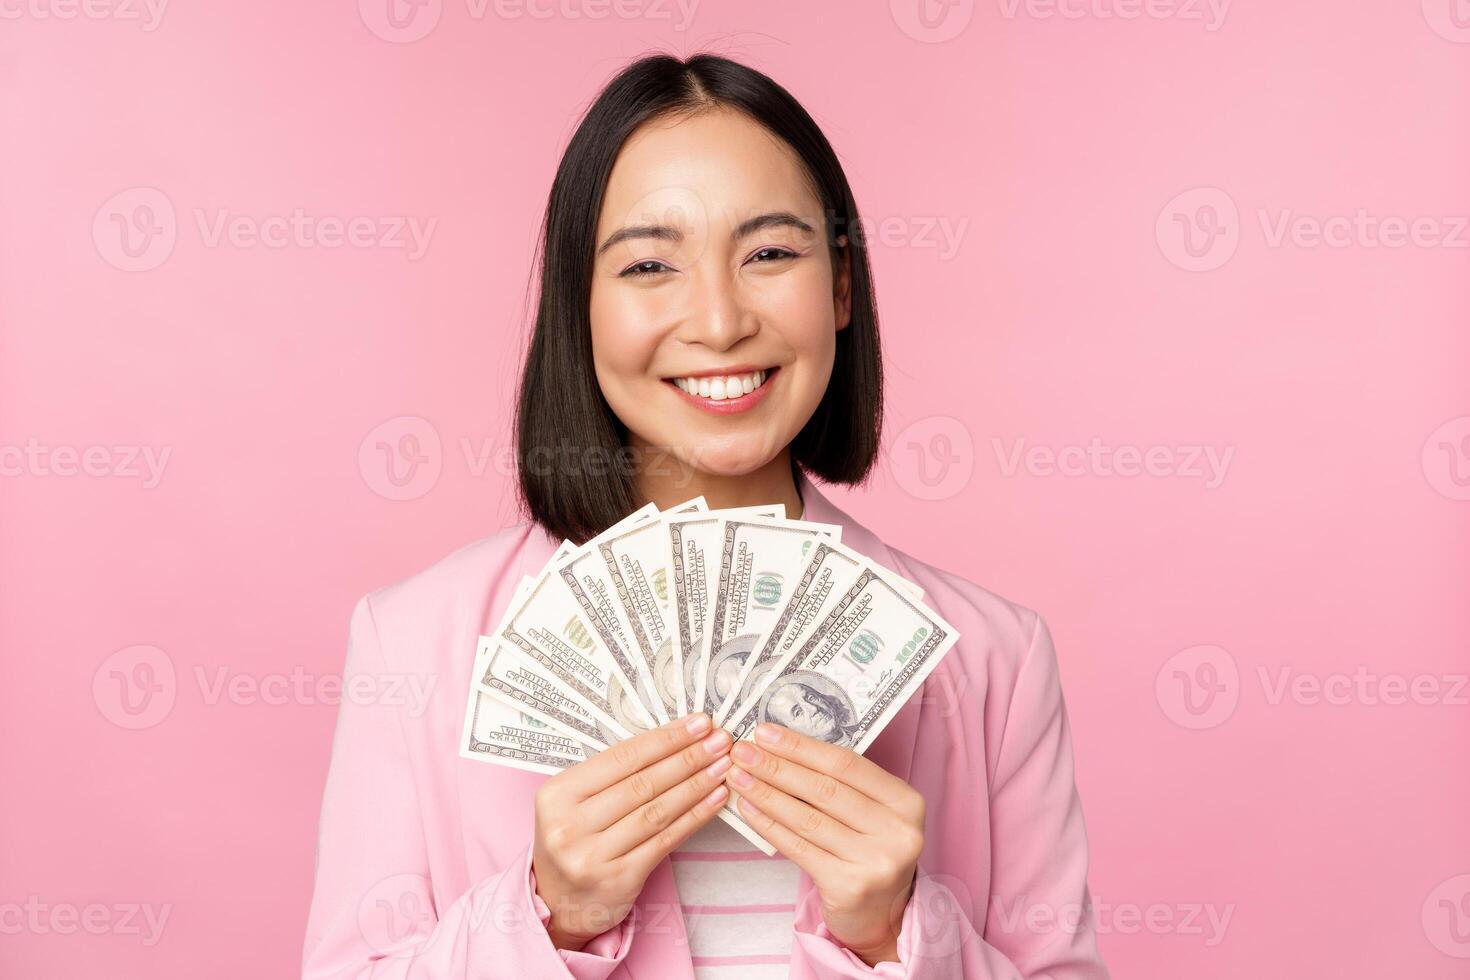 Finance, microcredit and people concept. Happy smiling asian businesswoman showing dollars money, standing in suit against pink background photo